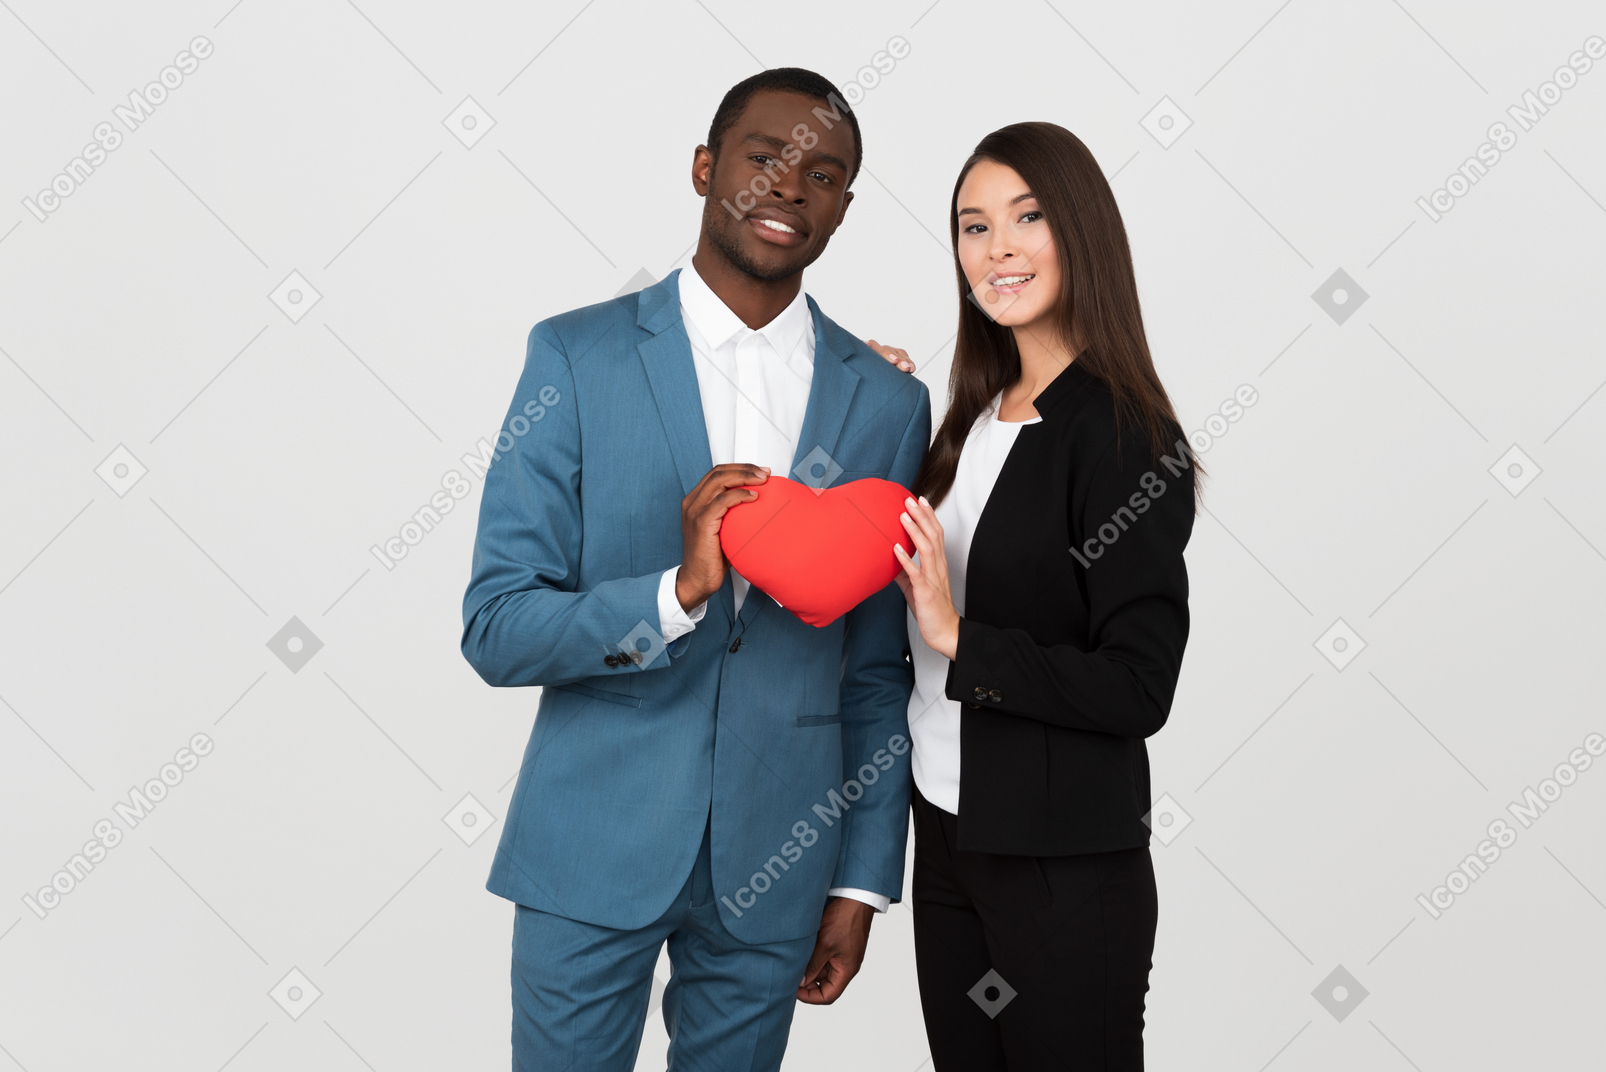 Beautiful interracial couple holding a toy heart together